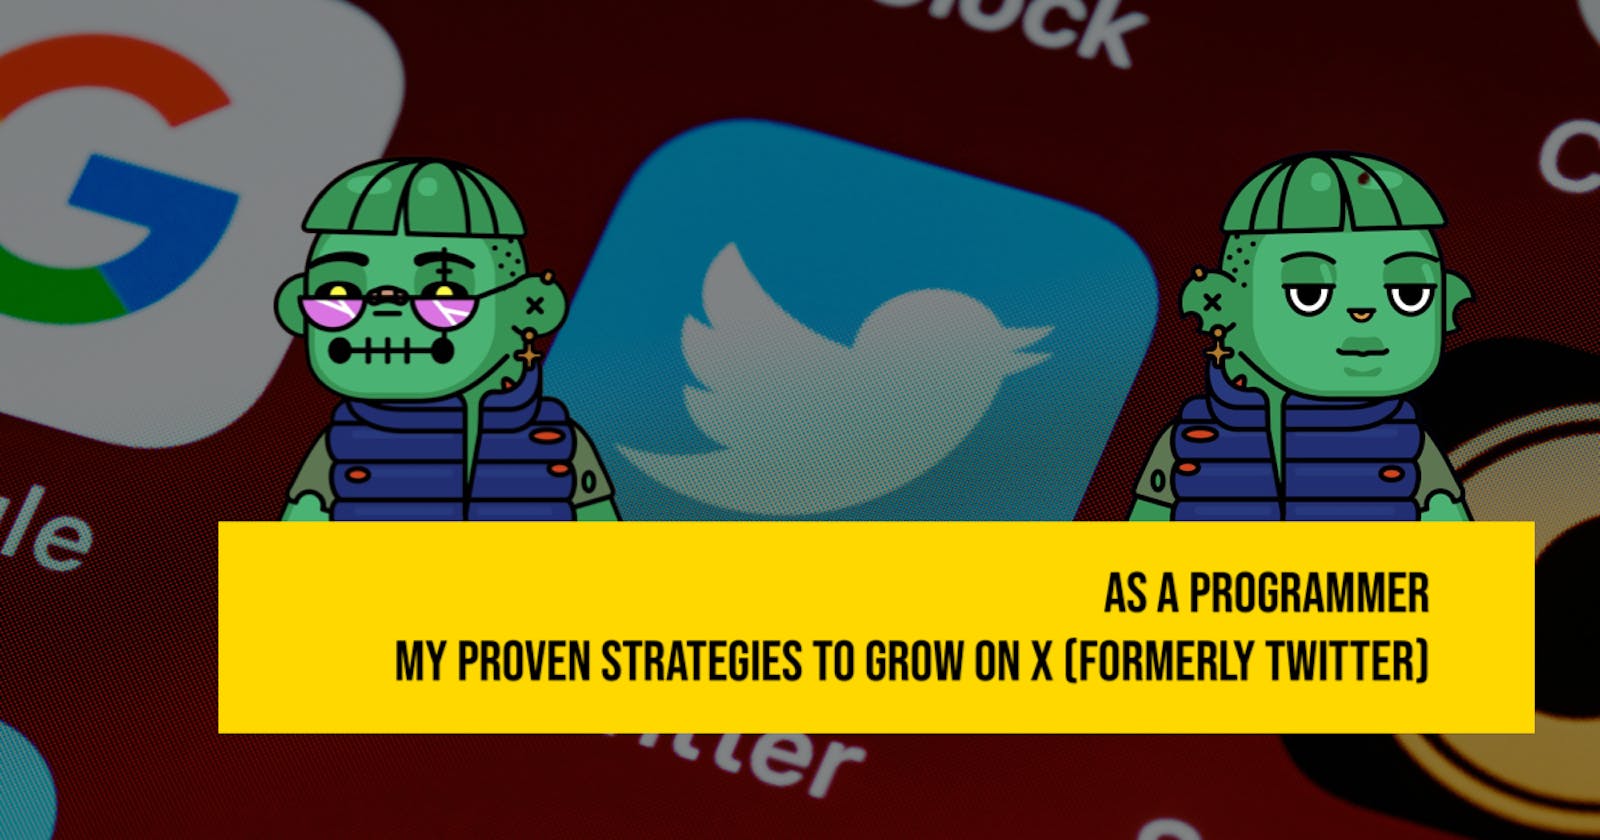 As a programmer -  My Proven Strategies to grow on X (formerly Twitter)